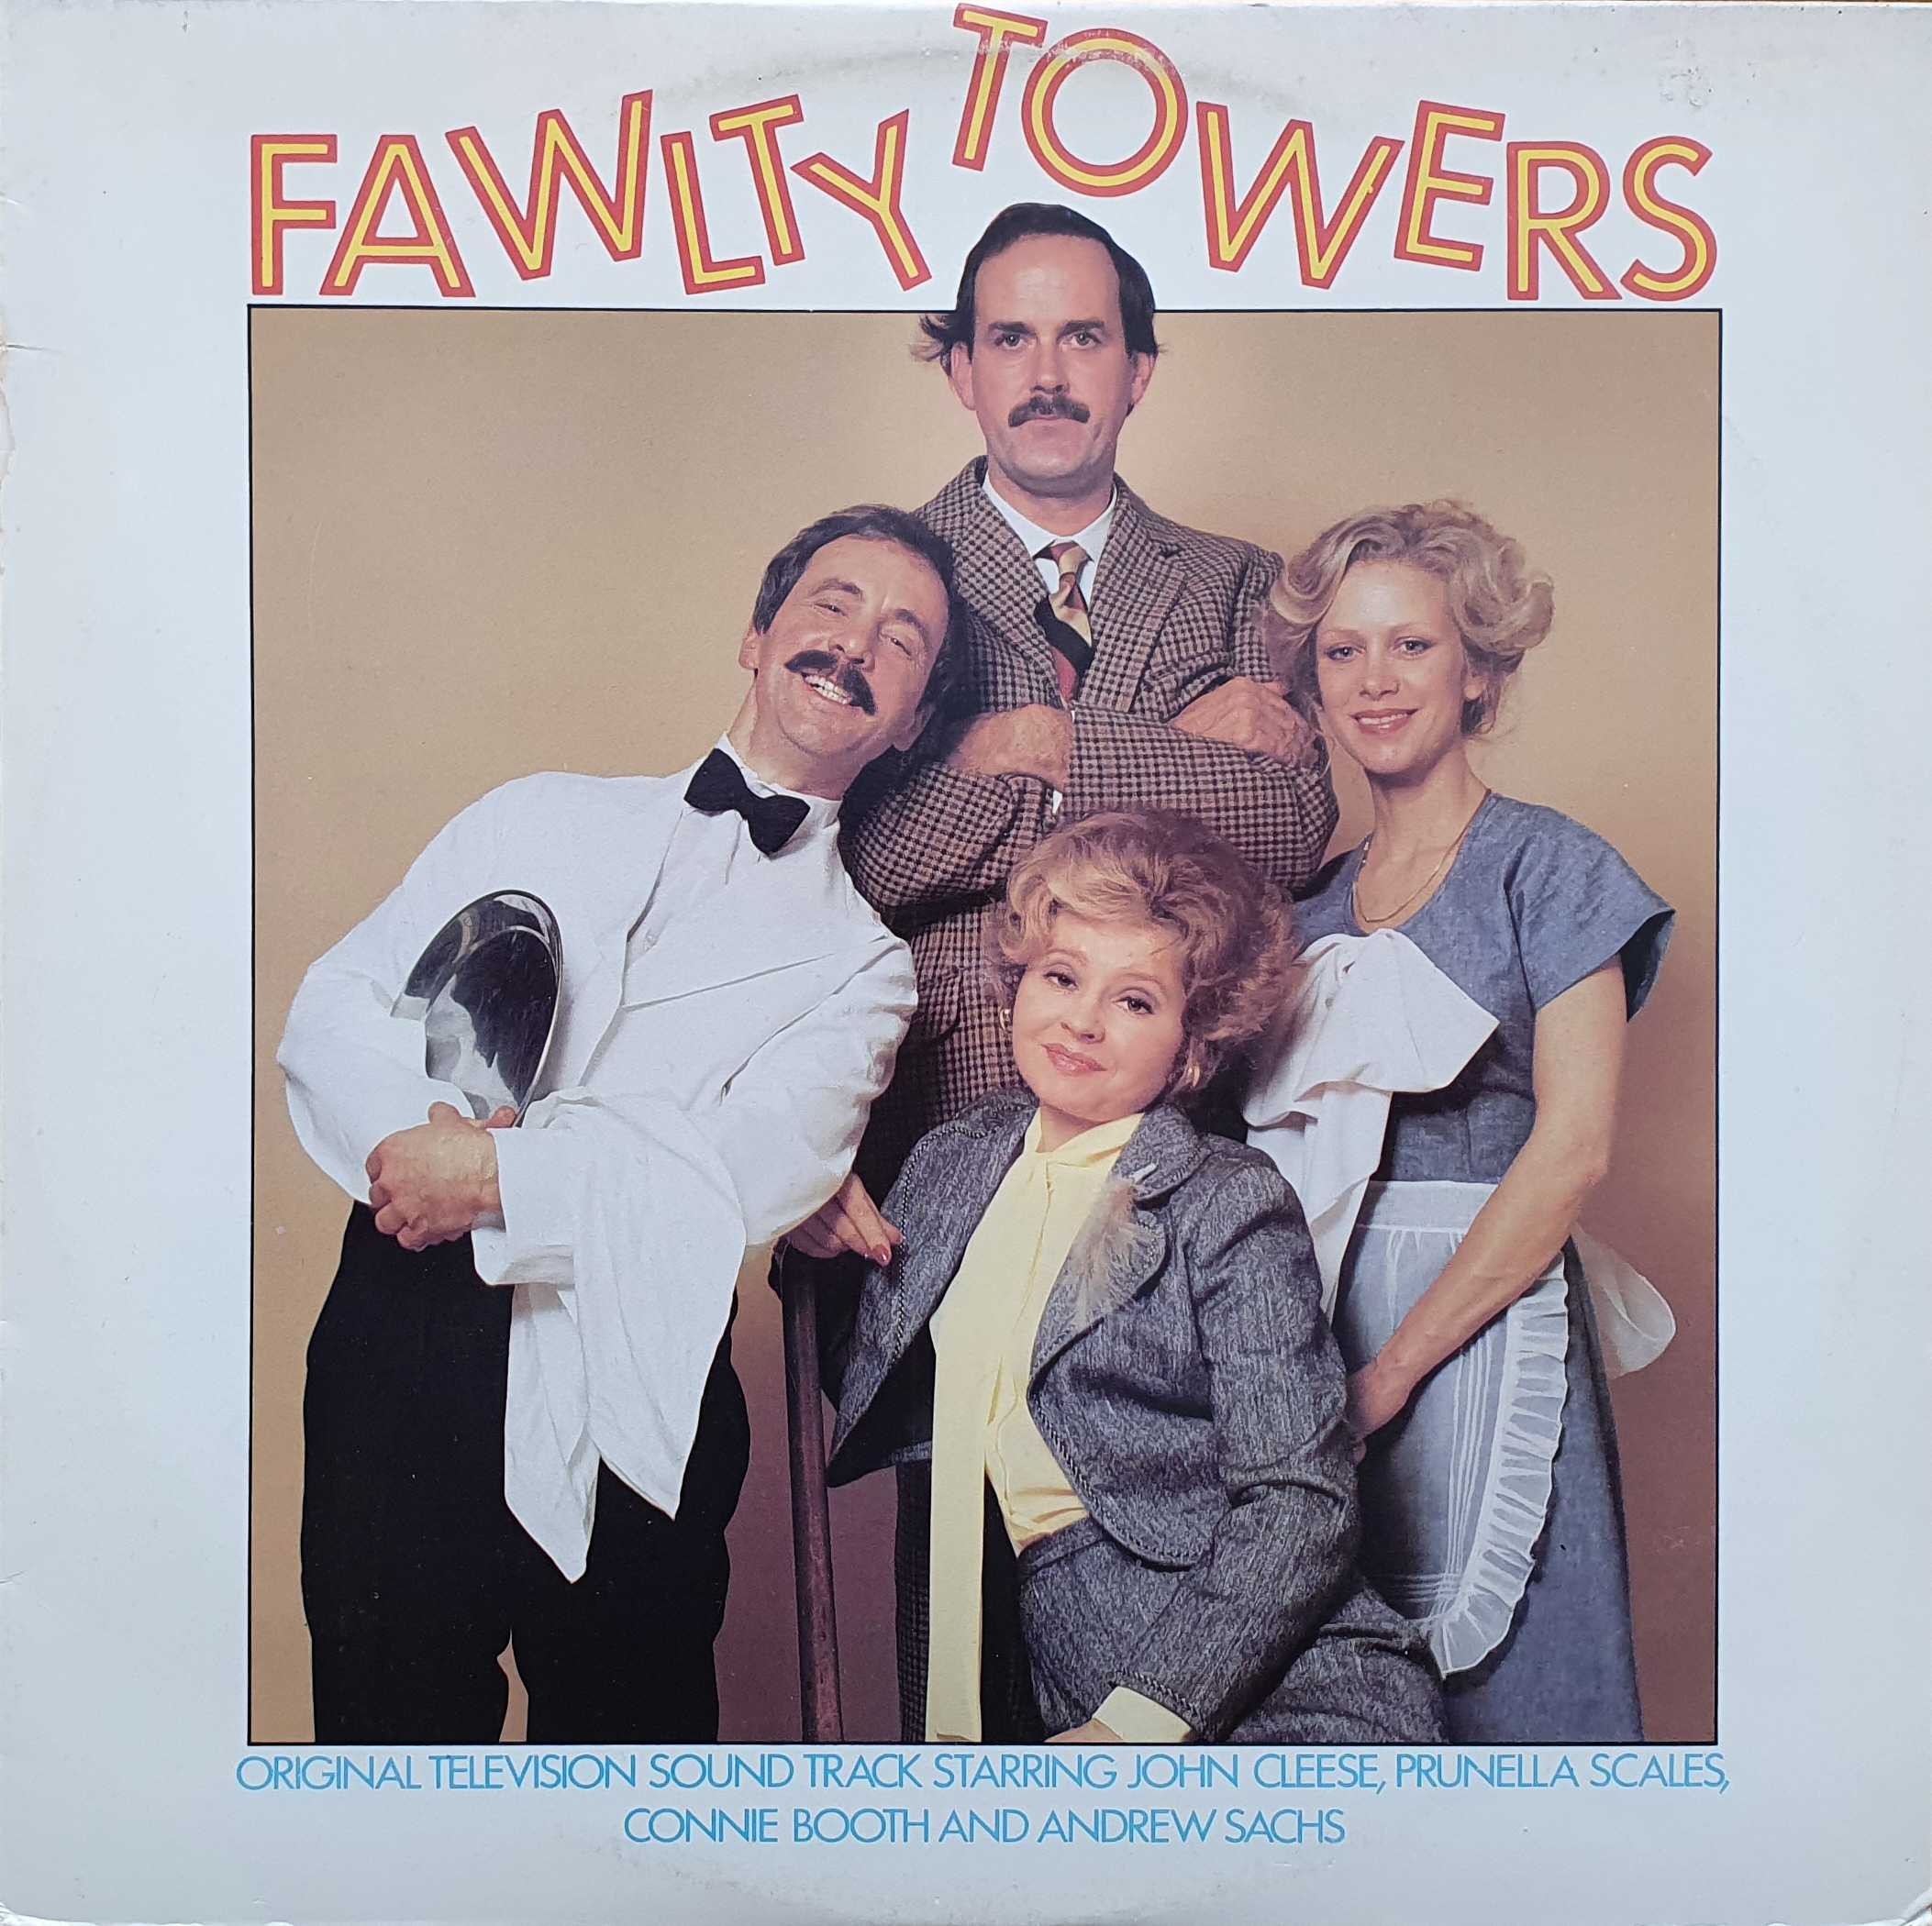 Picture of 2964 051 Fawlty Towers (Australian import) by artist John Cleese / Connie Booth from the BBC albums - Records and Tapes library